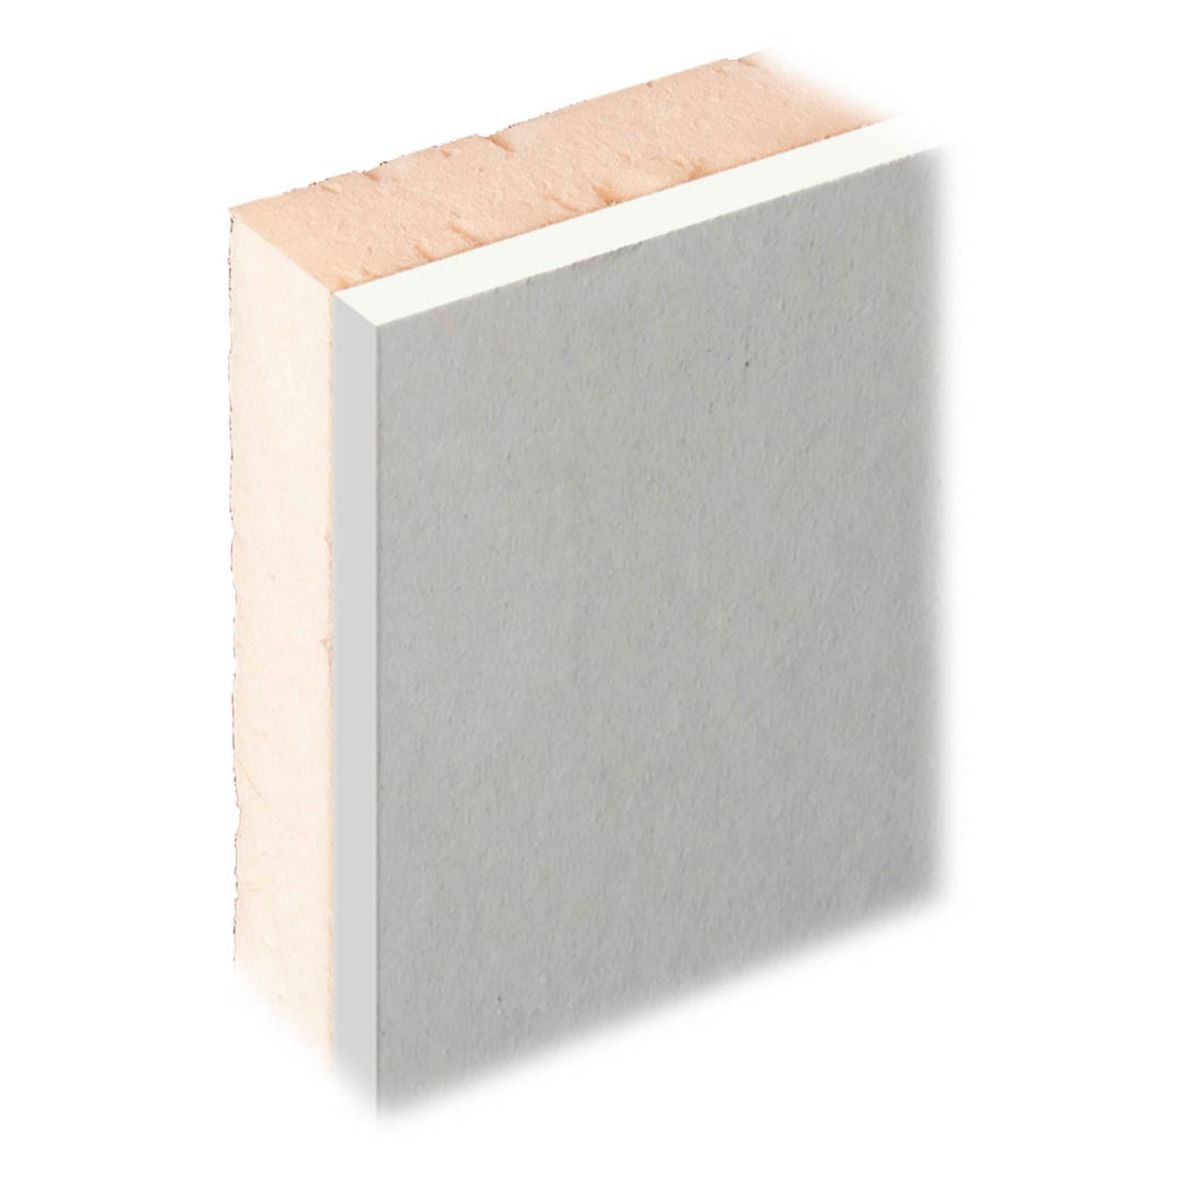 Knauf XPS Laminate Plus Tapered Edge Insulated Plasterboard - 55 x 1200 x 2400mm